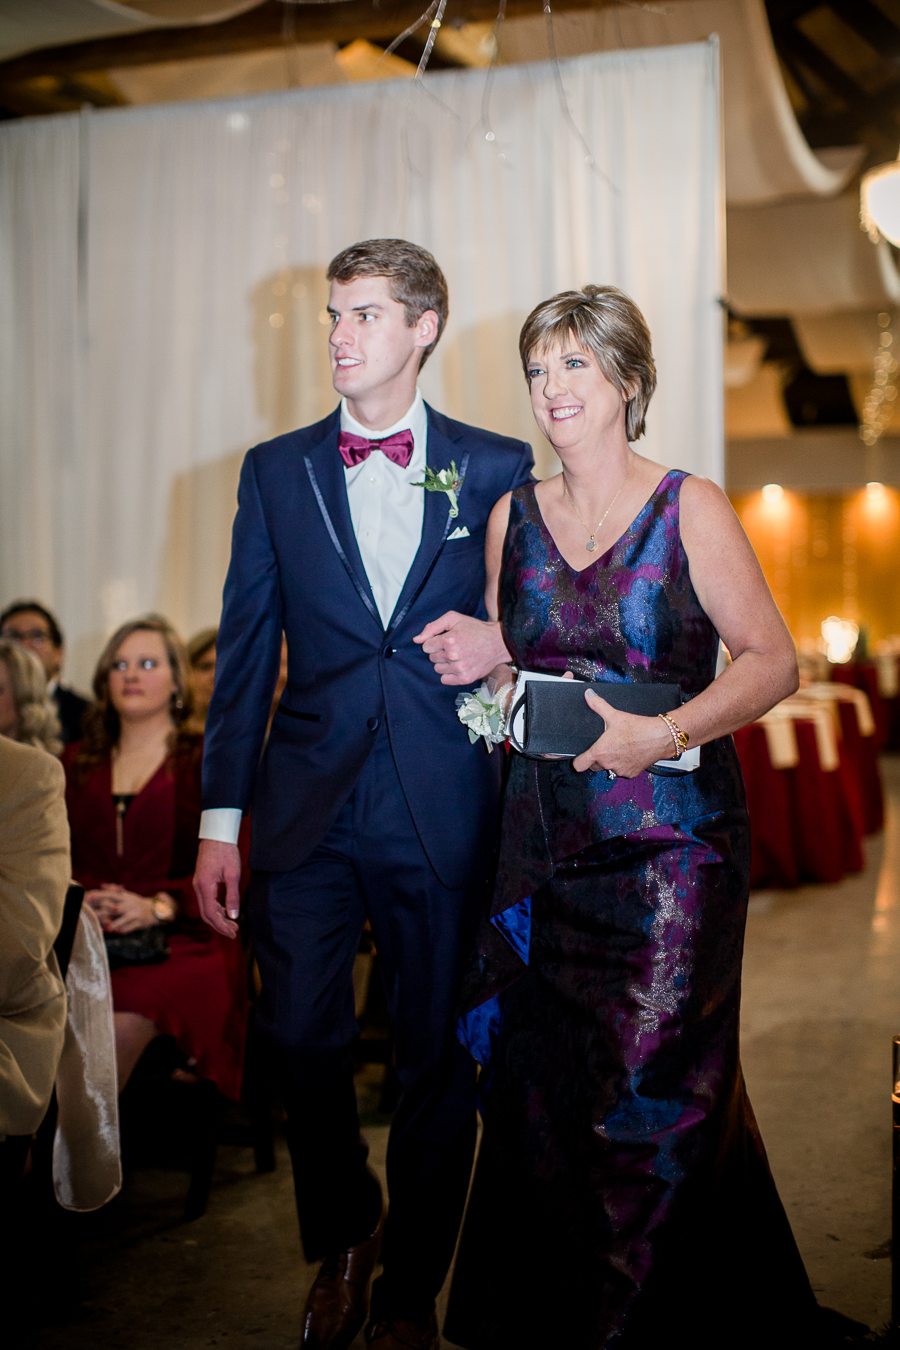 Mother of the bride being escorted down the aisle by her son during the ceremony pictures at this winter wedding at Knoxville Wedding Venue, Jackson Terminal, by Knoxville Wedding Photographer, Amanda May Photos.